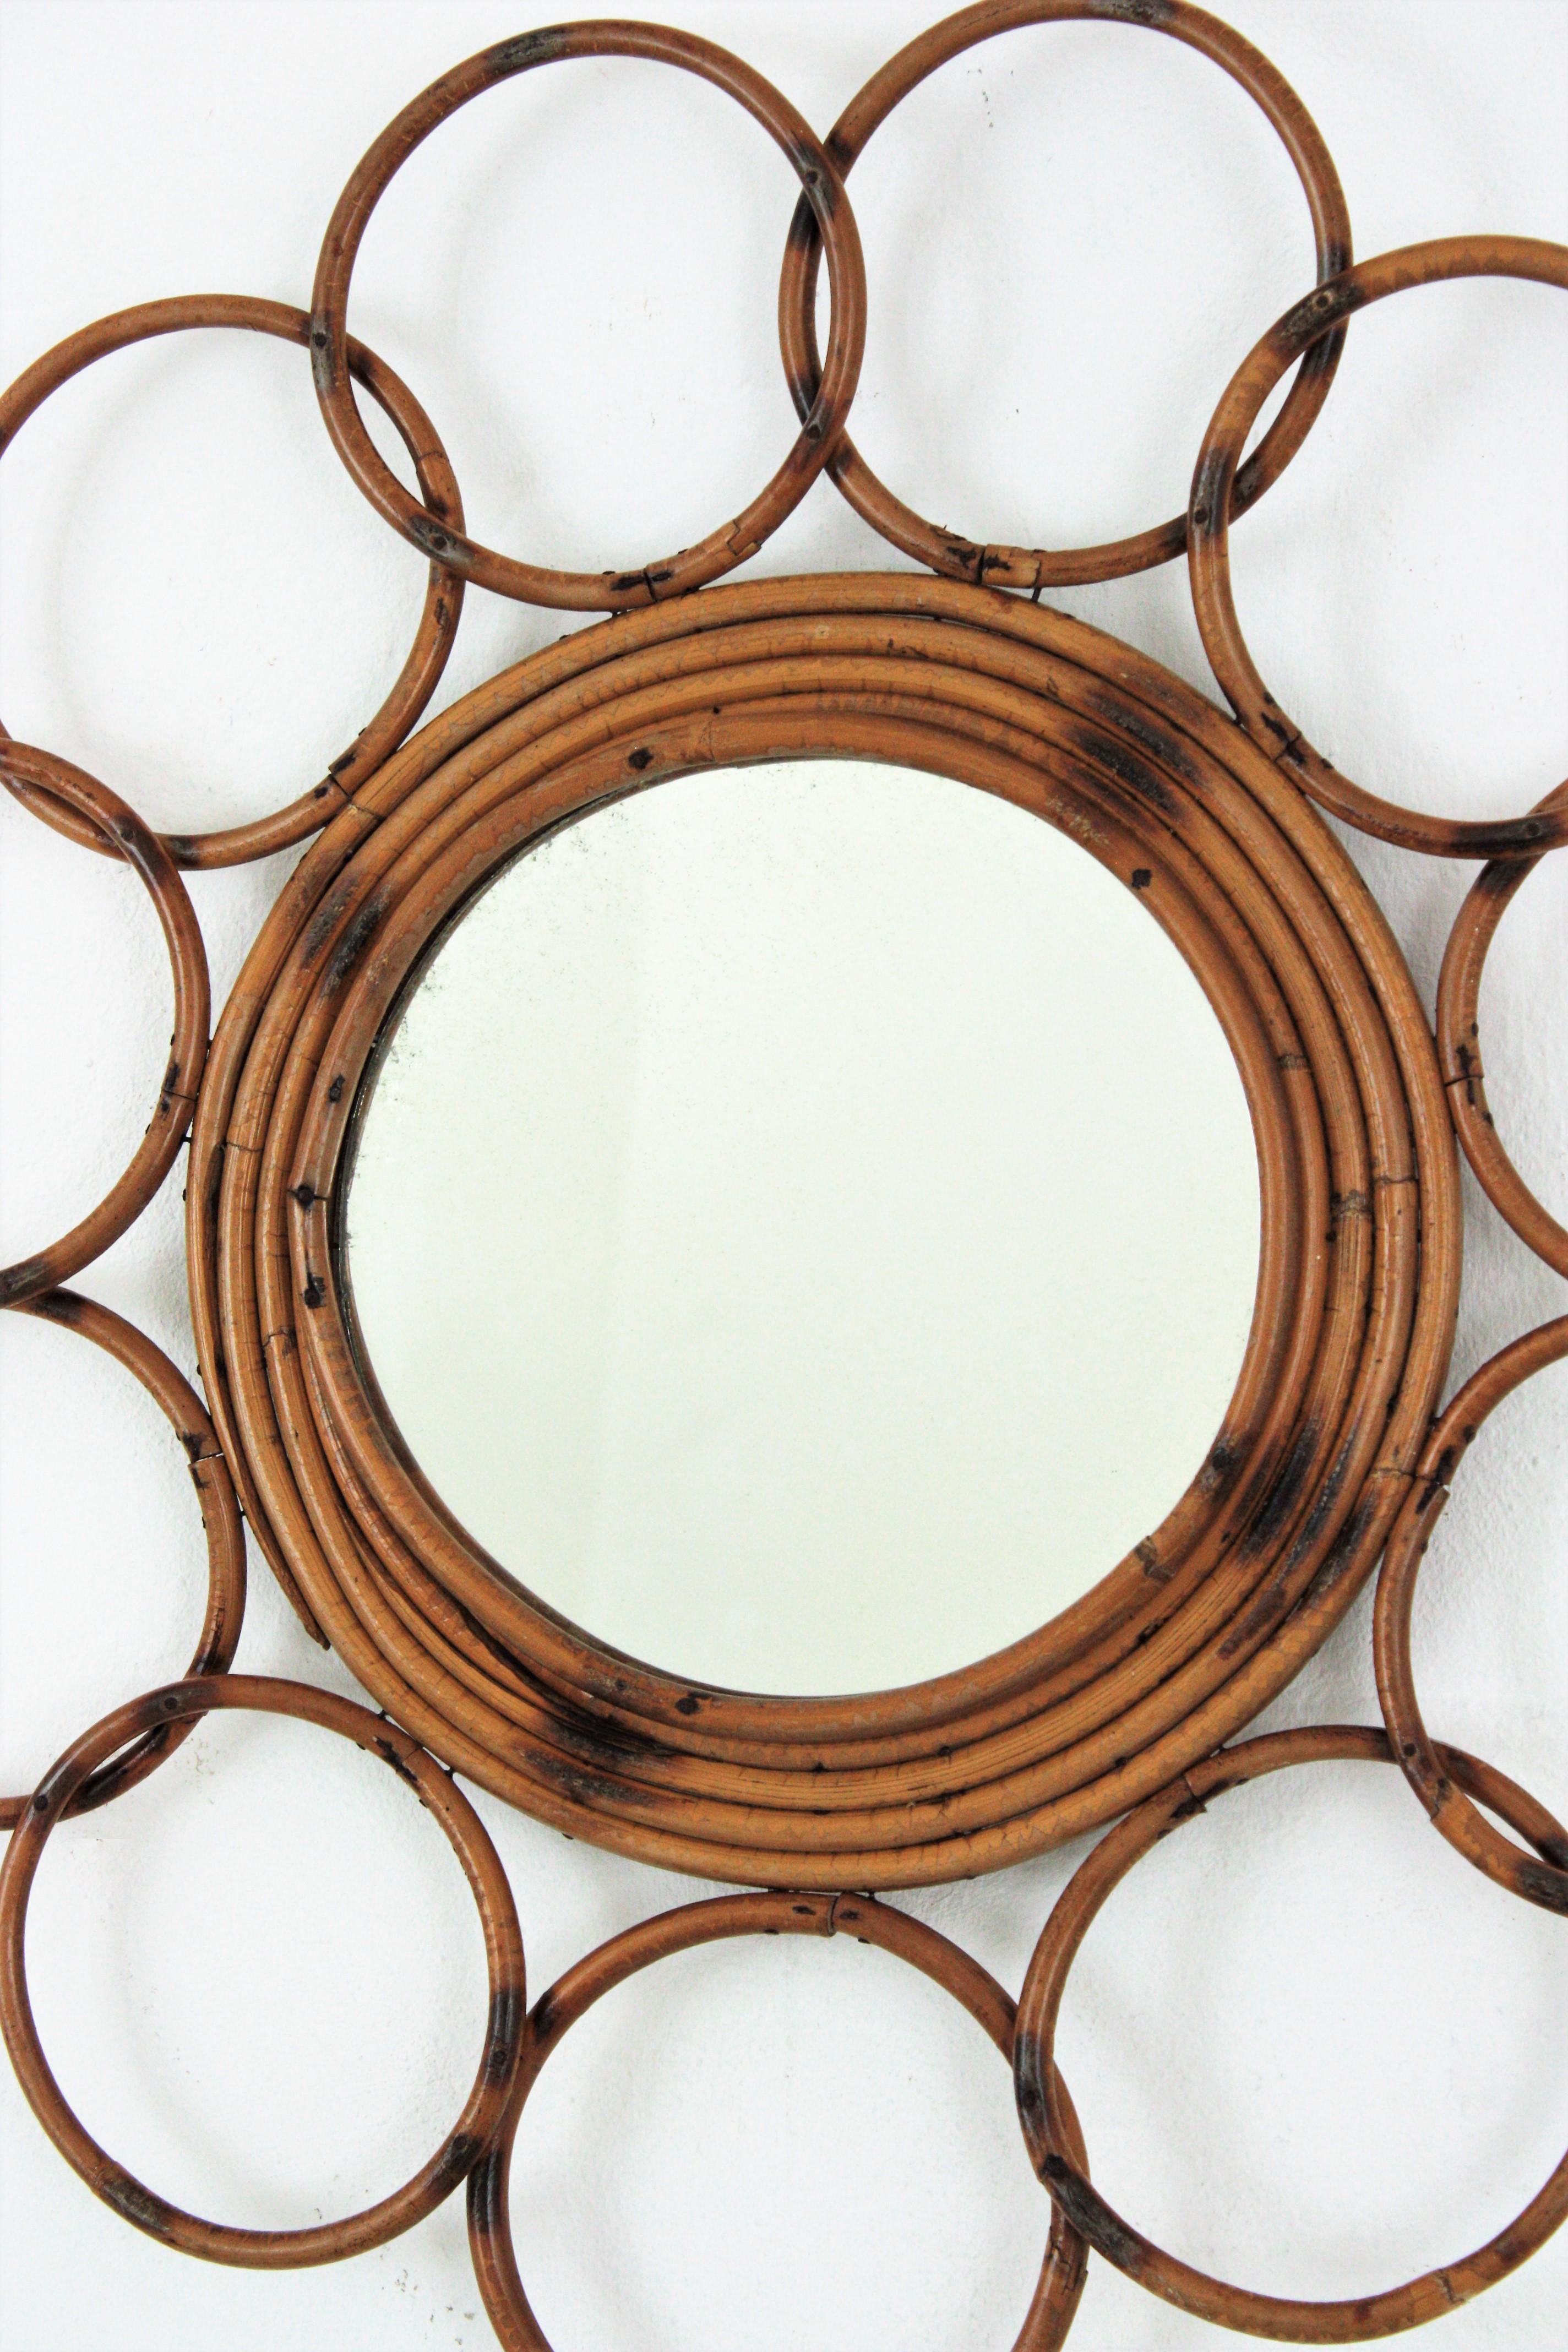 20th Century Rattan French Riviera Round Flower Mirror with Rings Frame, 1960s For Sale